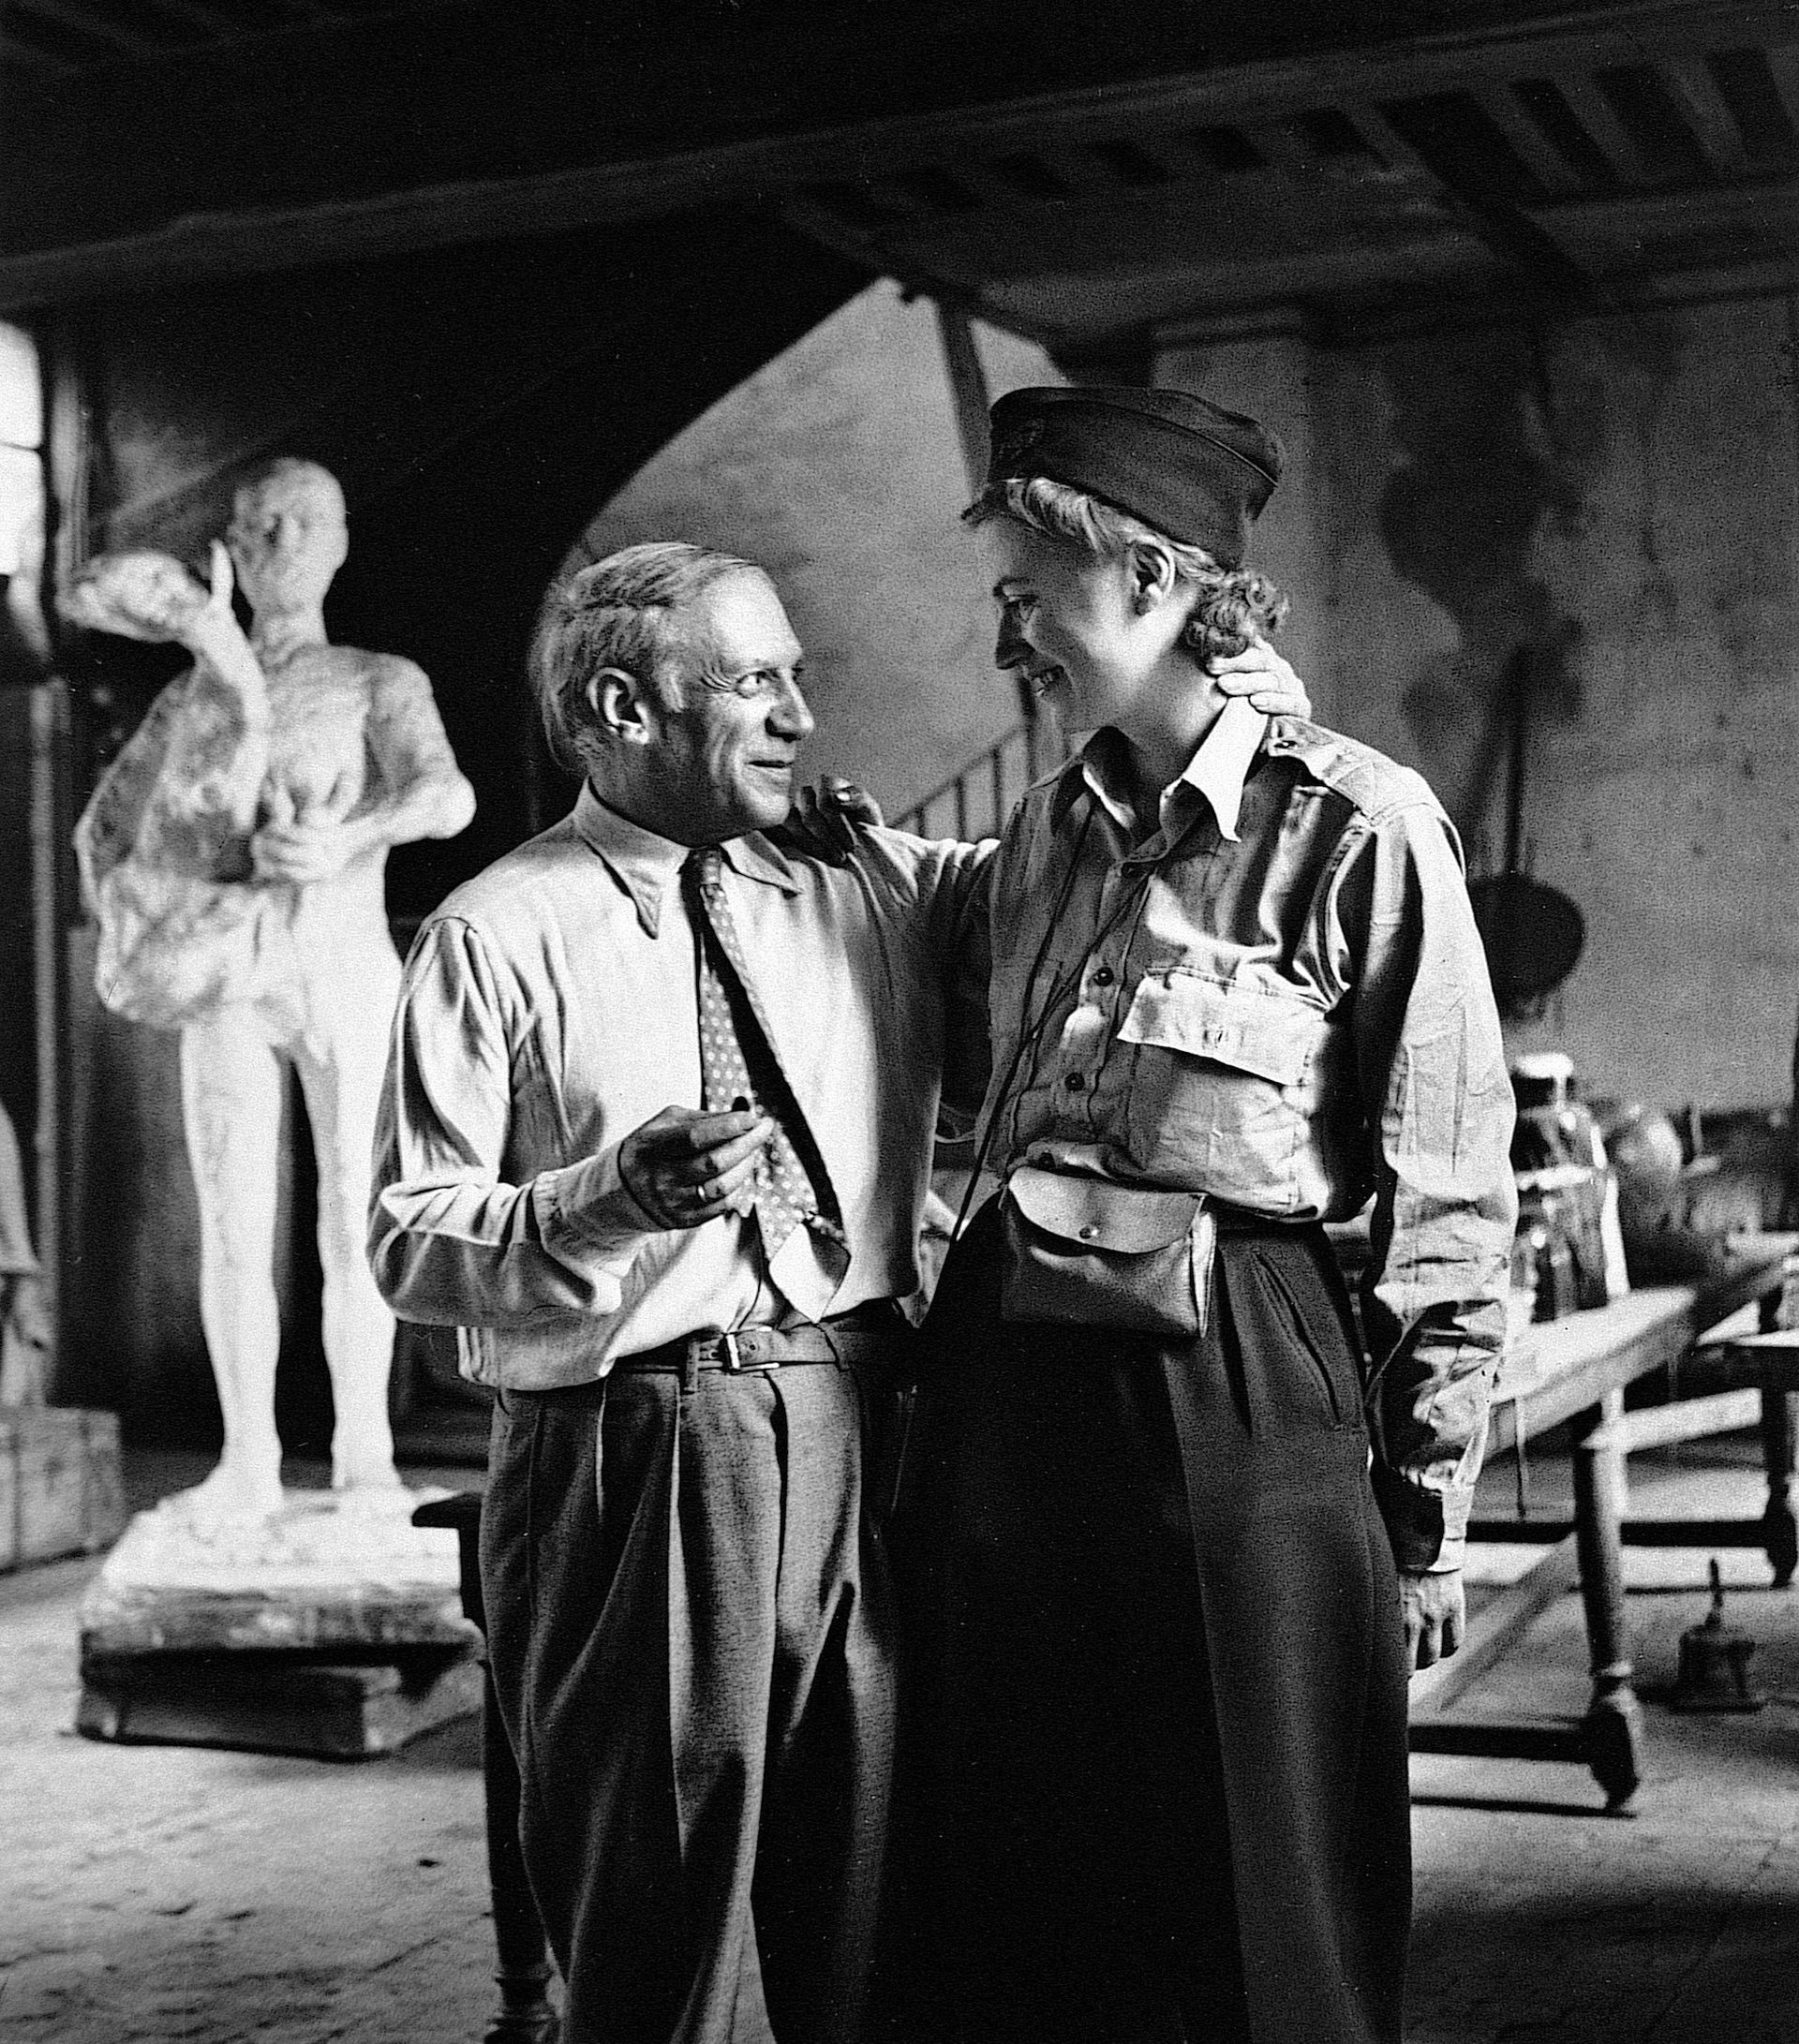 Picasso and Lee Miller in his studio, Liberation of Paris, Rue des Grands Augustins, Paris, France 1944 by Lee Miller. © Lee Miller Archives, England 2021. All rights reserved. www.leemiller.co.uk